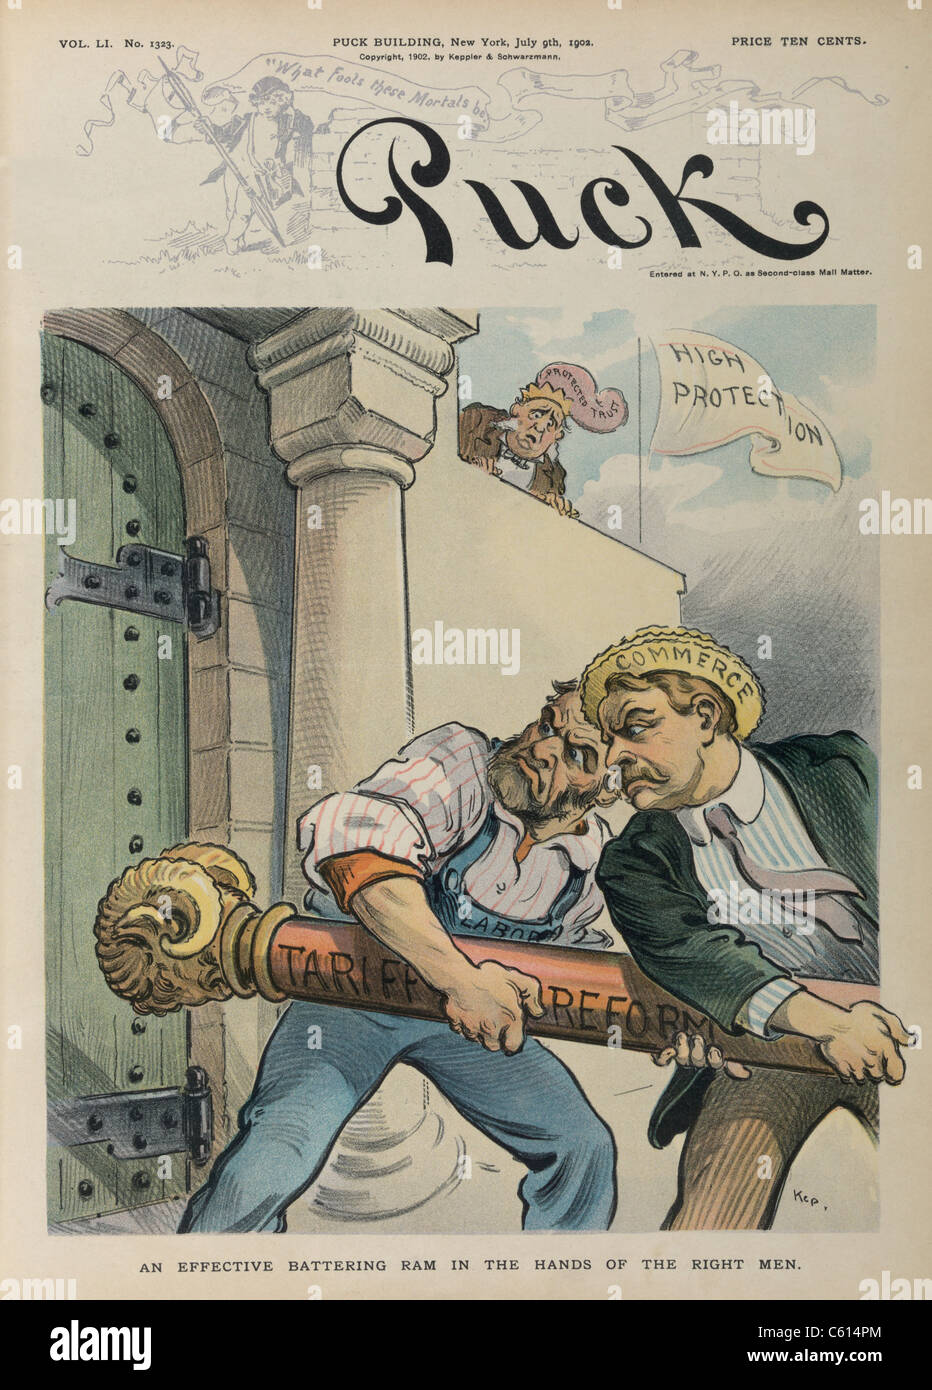 AN EFFECTIVE BATTERING RAM IN THE HANDS OF THE RIGHT MEN. Cartoon portrays labor and commerce using a battering ram to breech the wall of high protective tariffs. Udo Keppler cartoon was published on the cover of PUCK on July 9 1902. (BSLOC 2010 18 57) Stock Photo